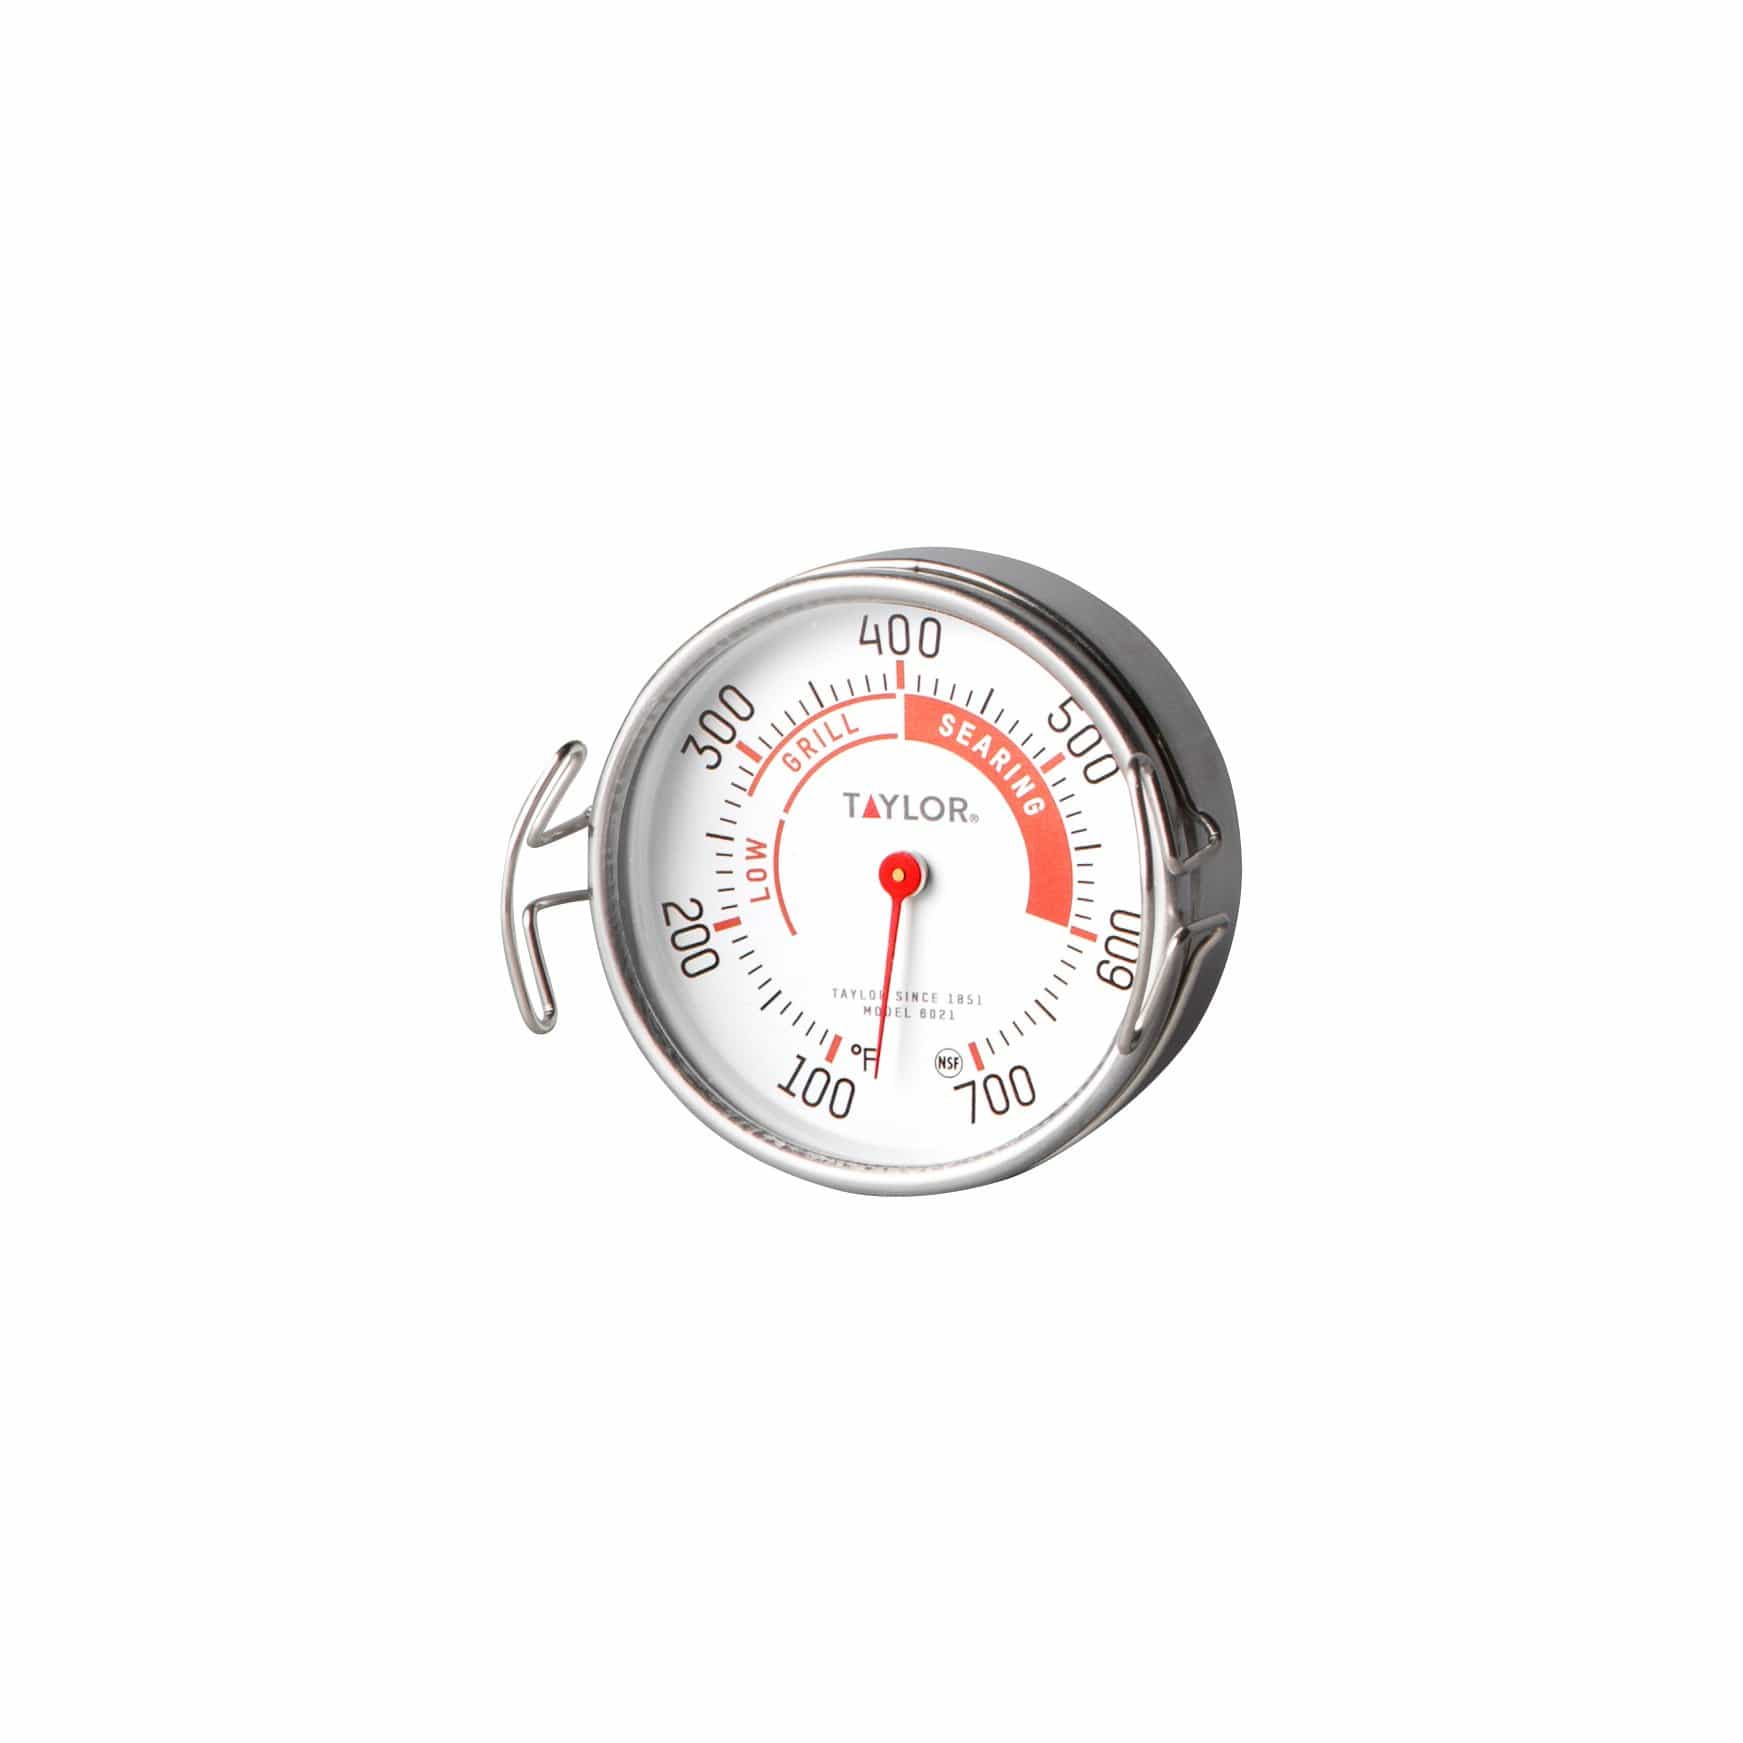 Polder® Grill Surface Cooking Thermometer, 1 ct - Kroger